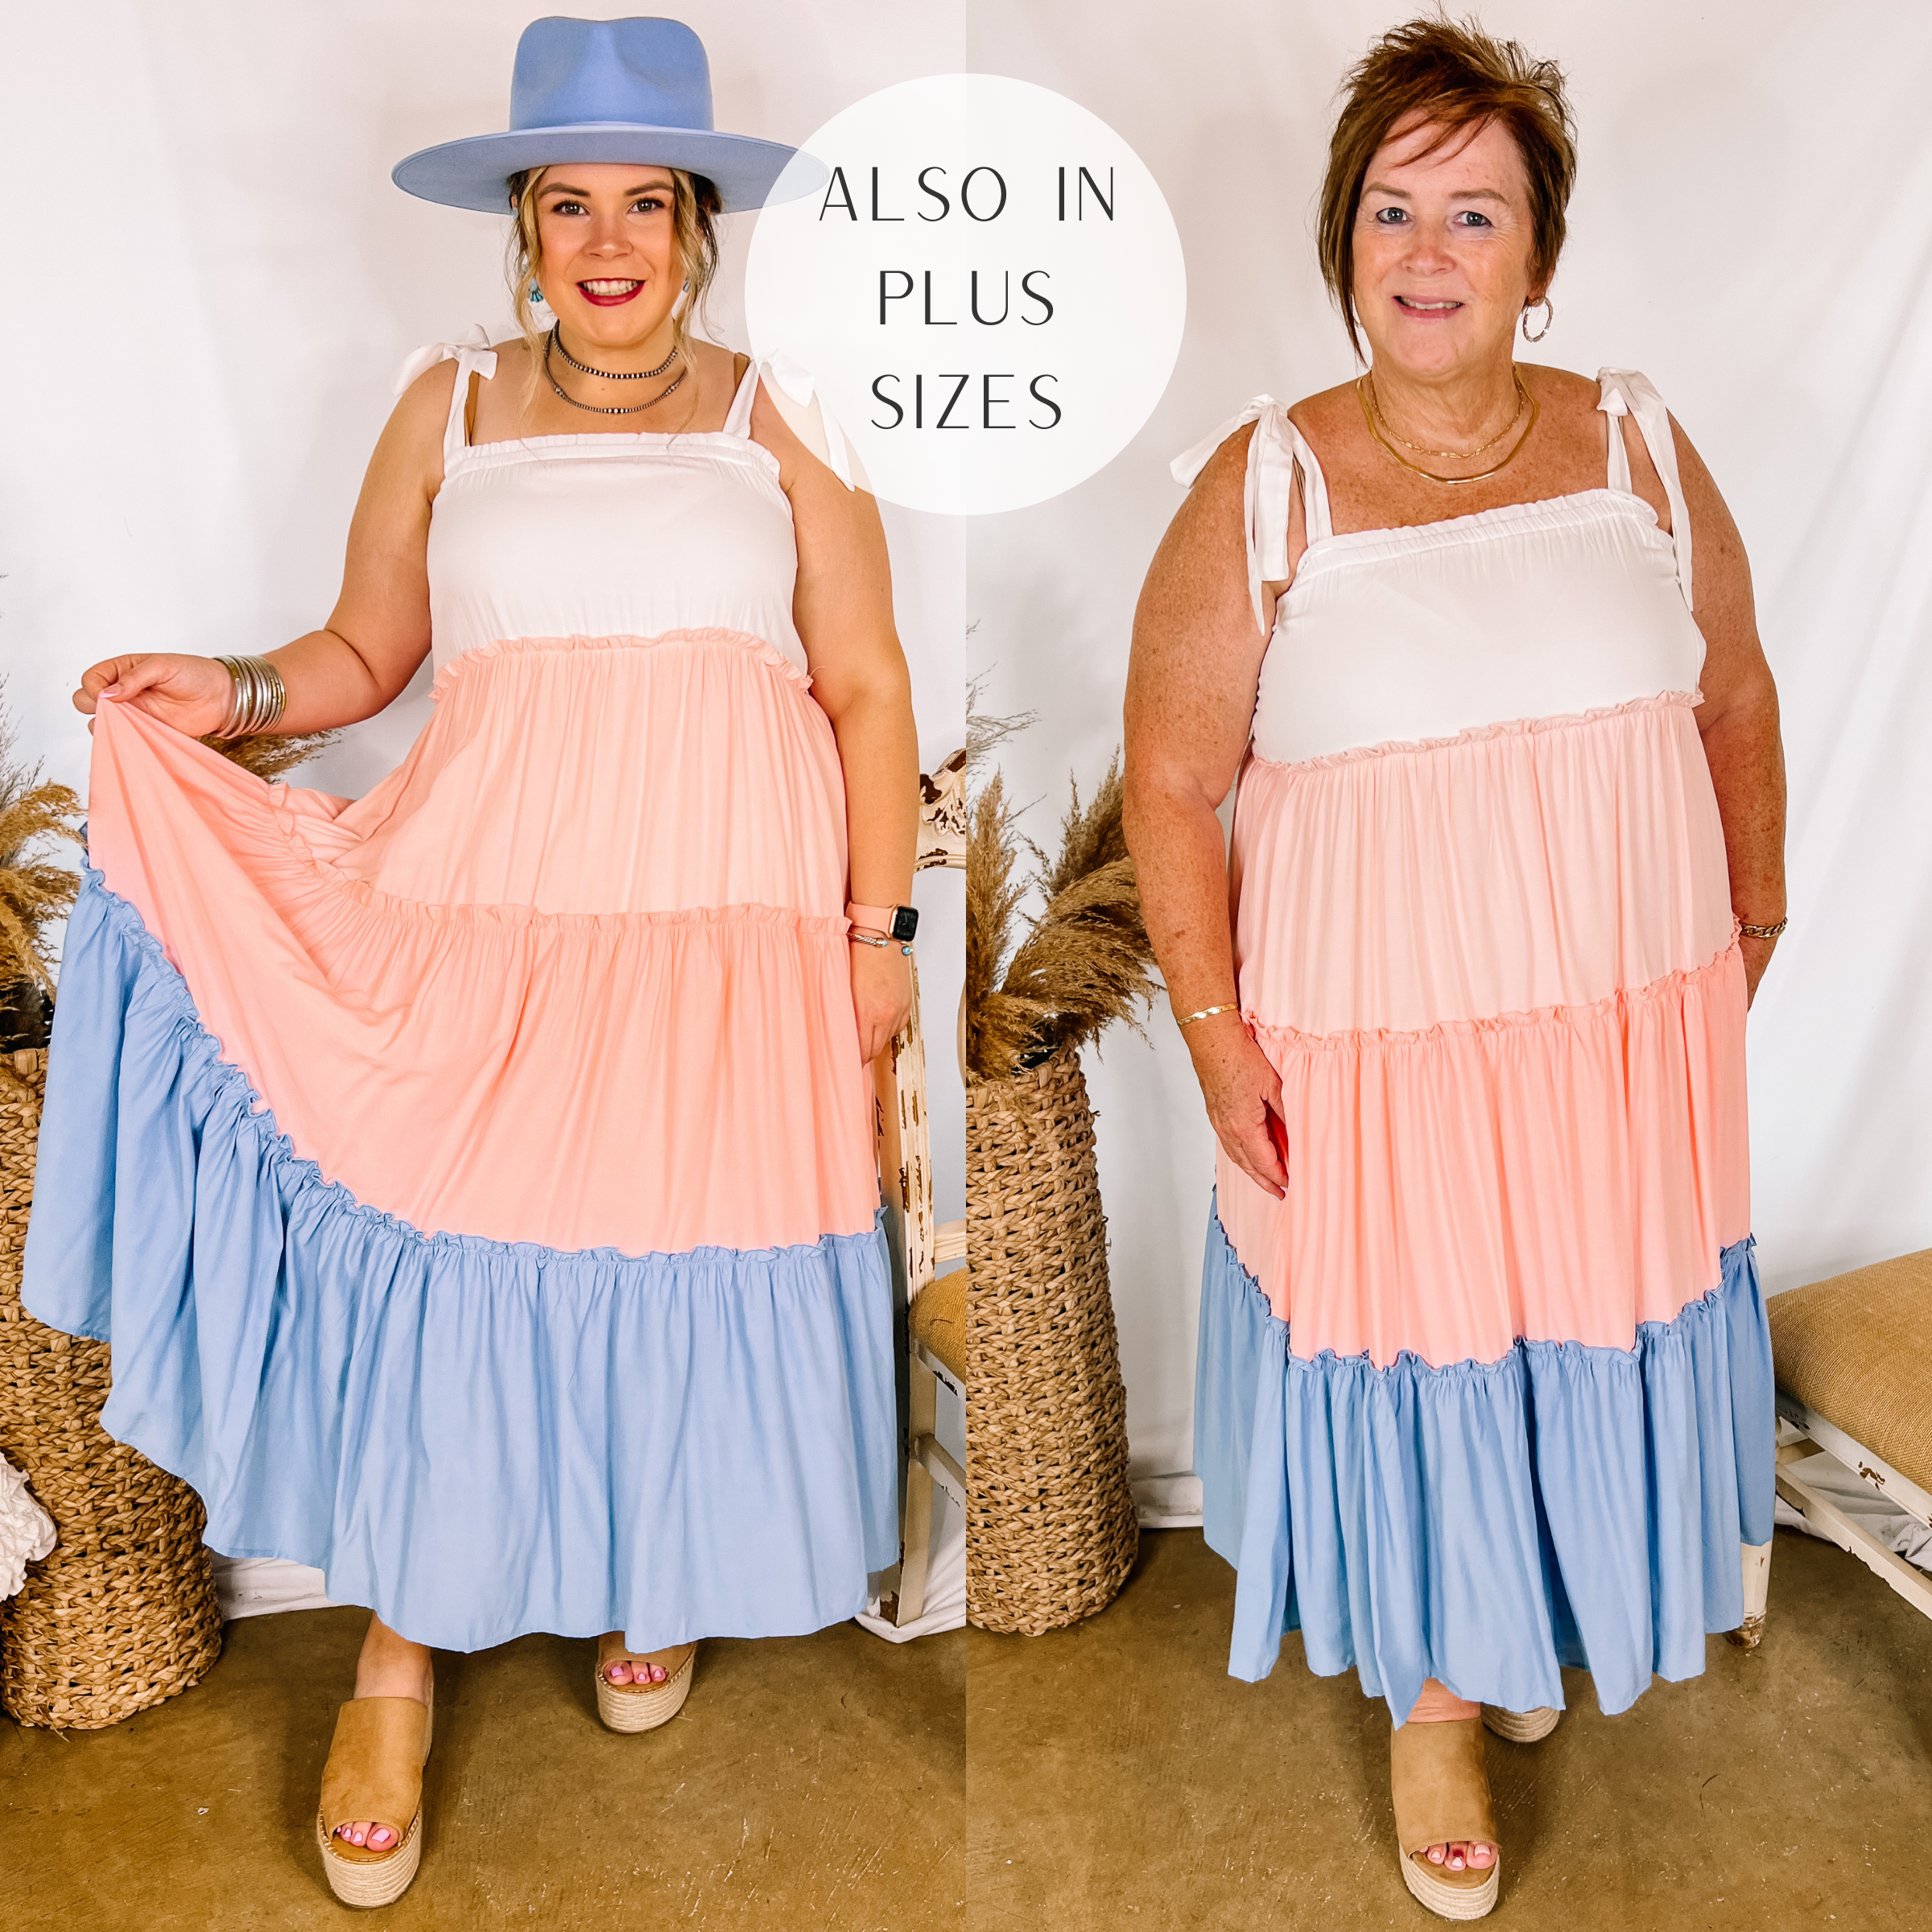 Model is wearing a white, pink, and blue mix color block maxi dress. Model has it paired with tan wedges, silver jewelry, and a blue hat.